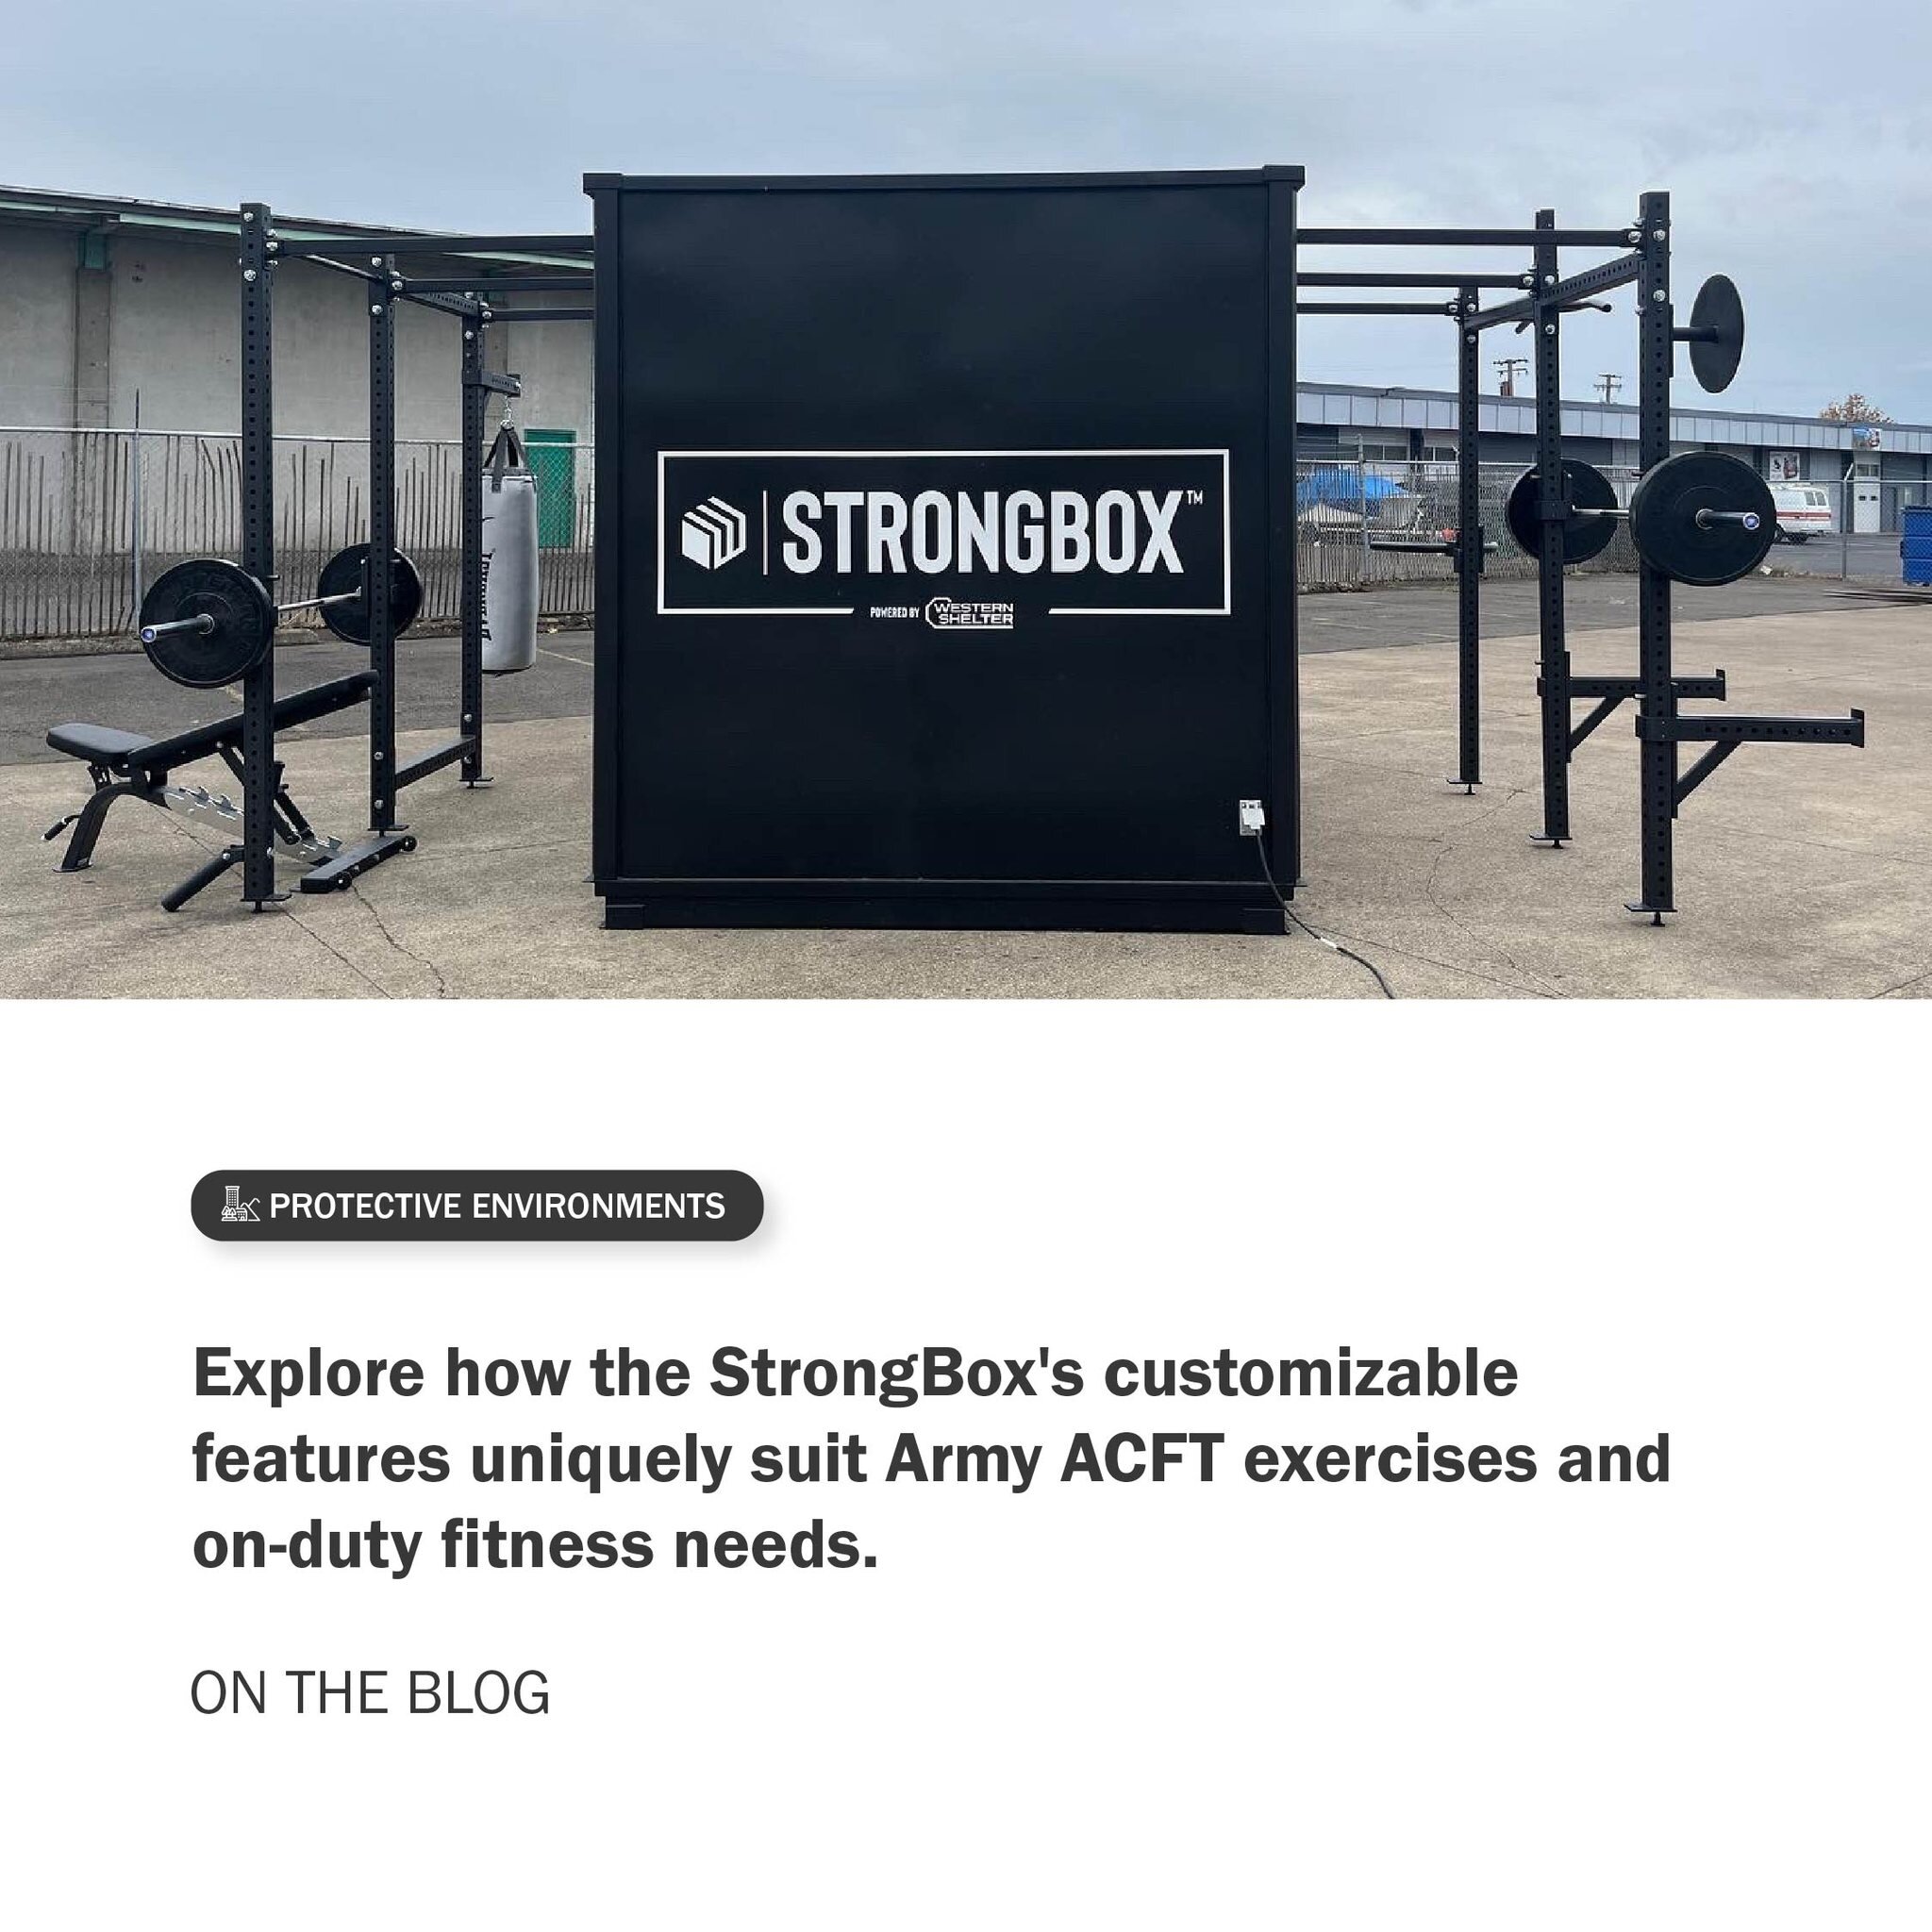 Customize your workout to meet Army standards with the StrongBox! Explore how its adaptable features Army ACFT exercises and on-duty fitness needs. 💪

Dive deep into the world of tailored fitness and see how it can enhance your physical training wit